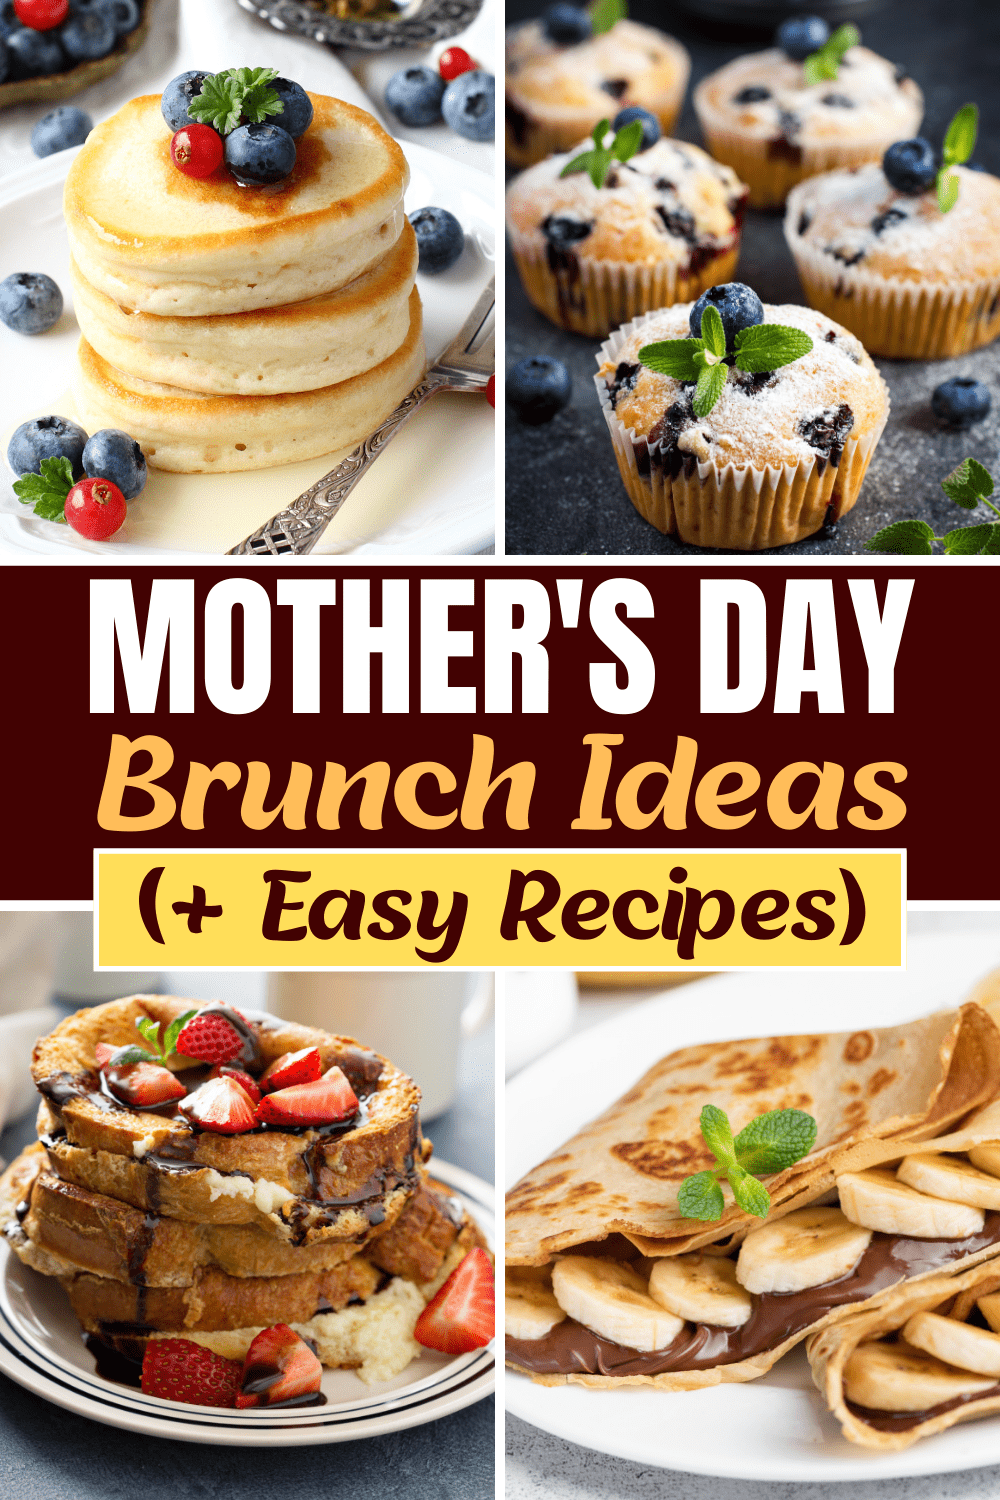 30 Mother’s Day Brunch Ideas (+ Easy Recipes) - Insanely Good